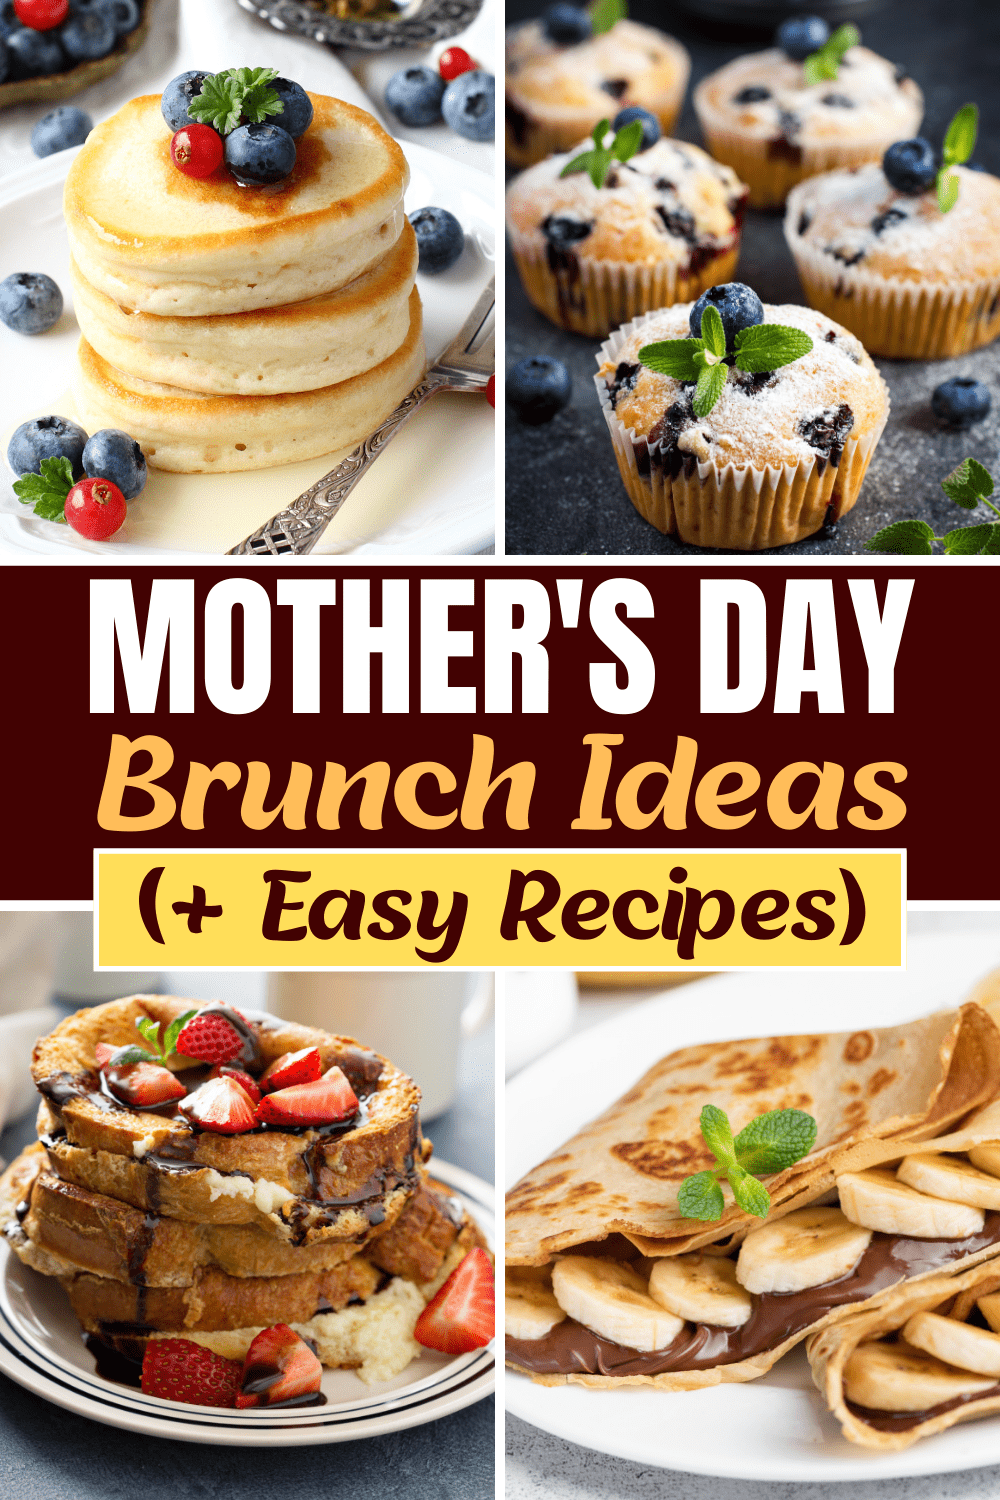 30 Mother’s Day Brunch Ideas (+ Easy Recipes) - Insanely Good